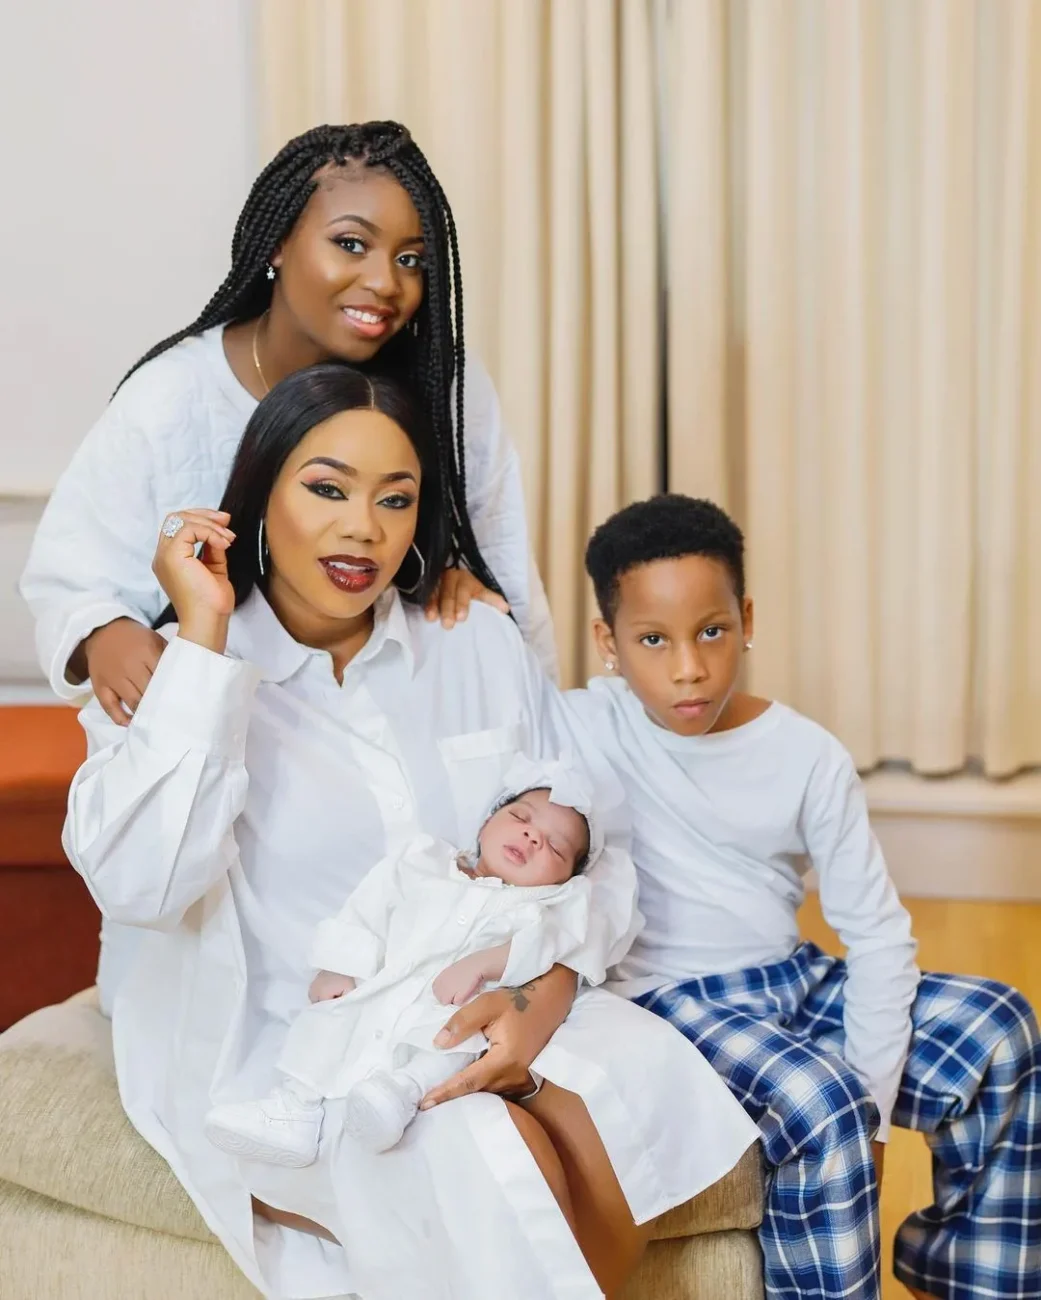 Toyin Lawani opens up on having kids for three different men